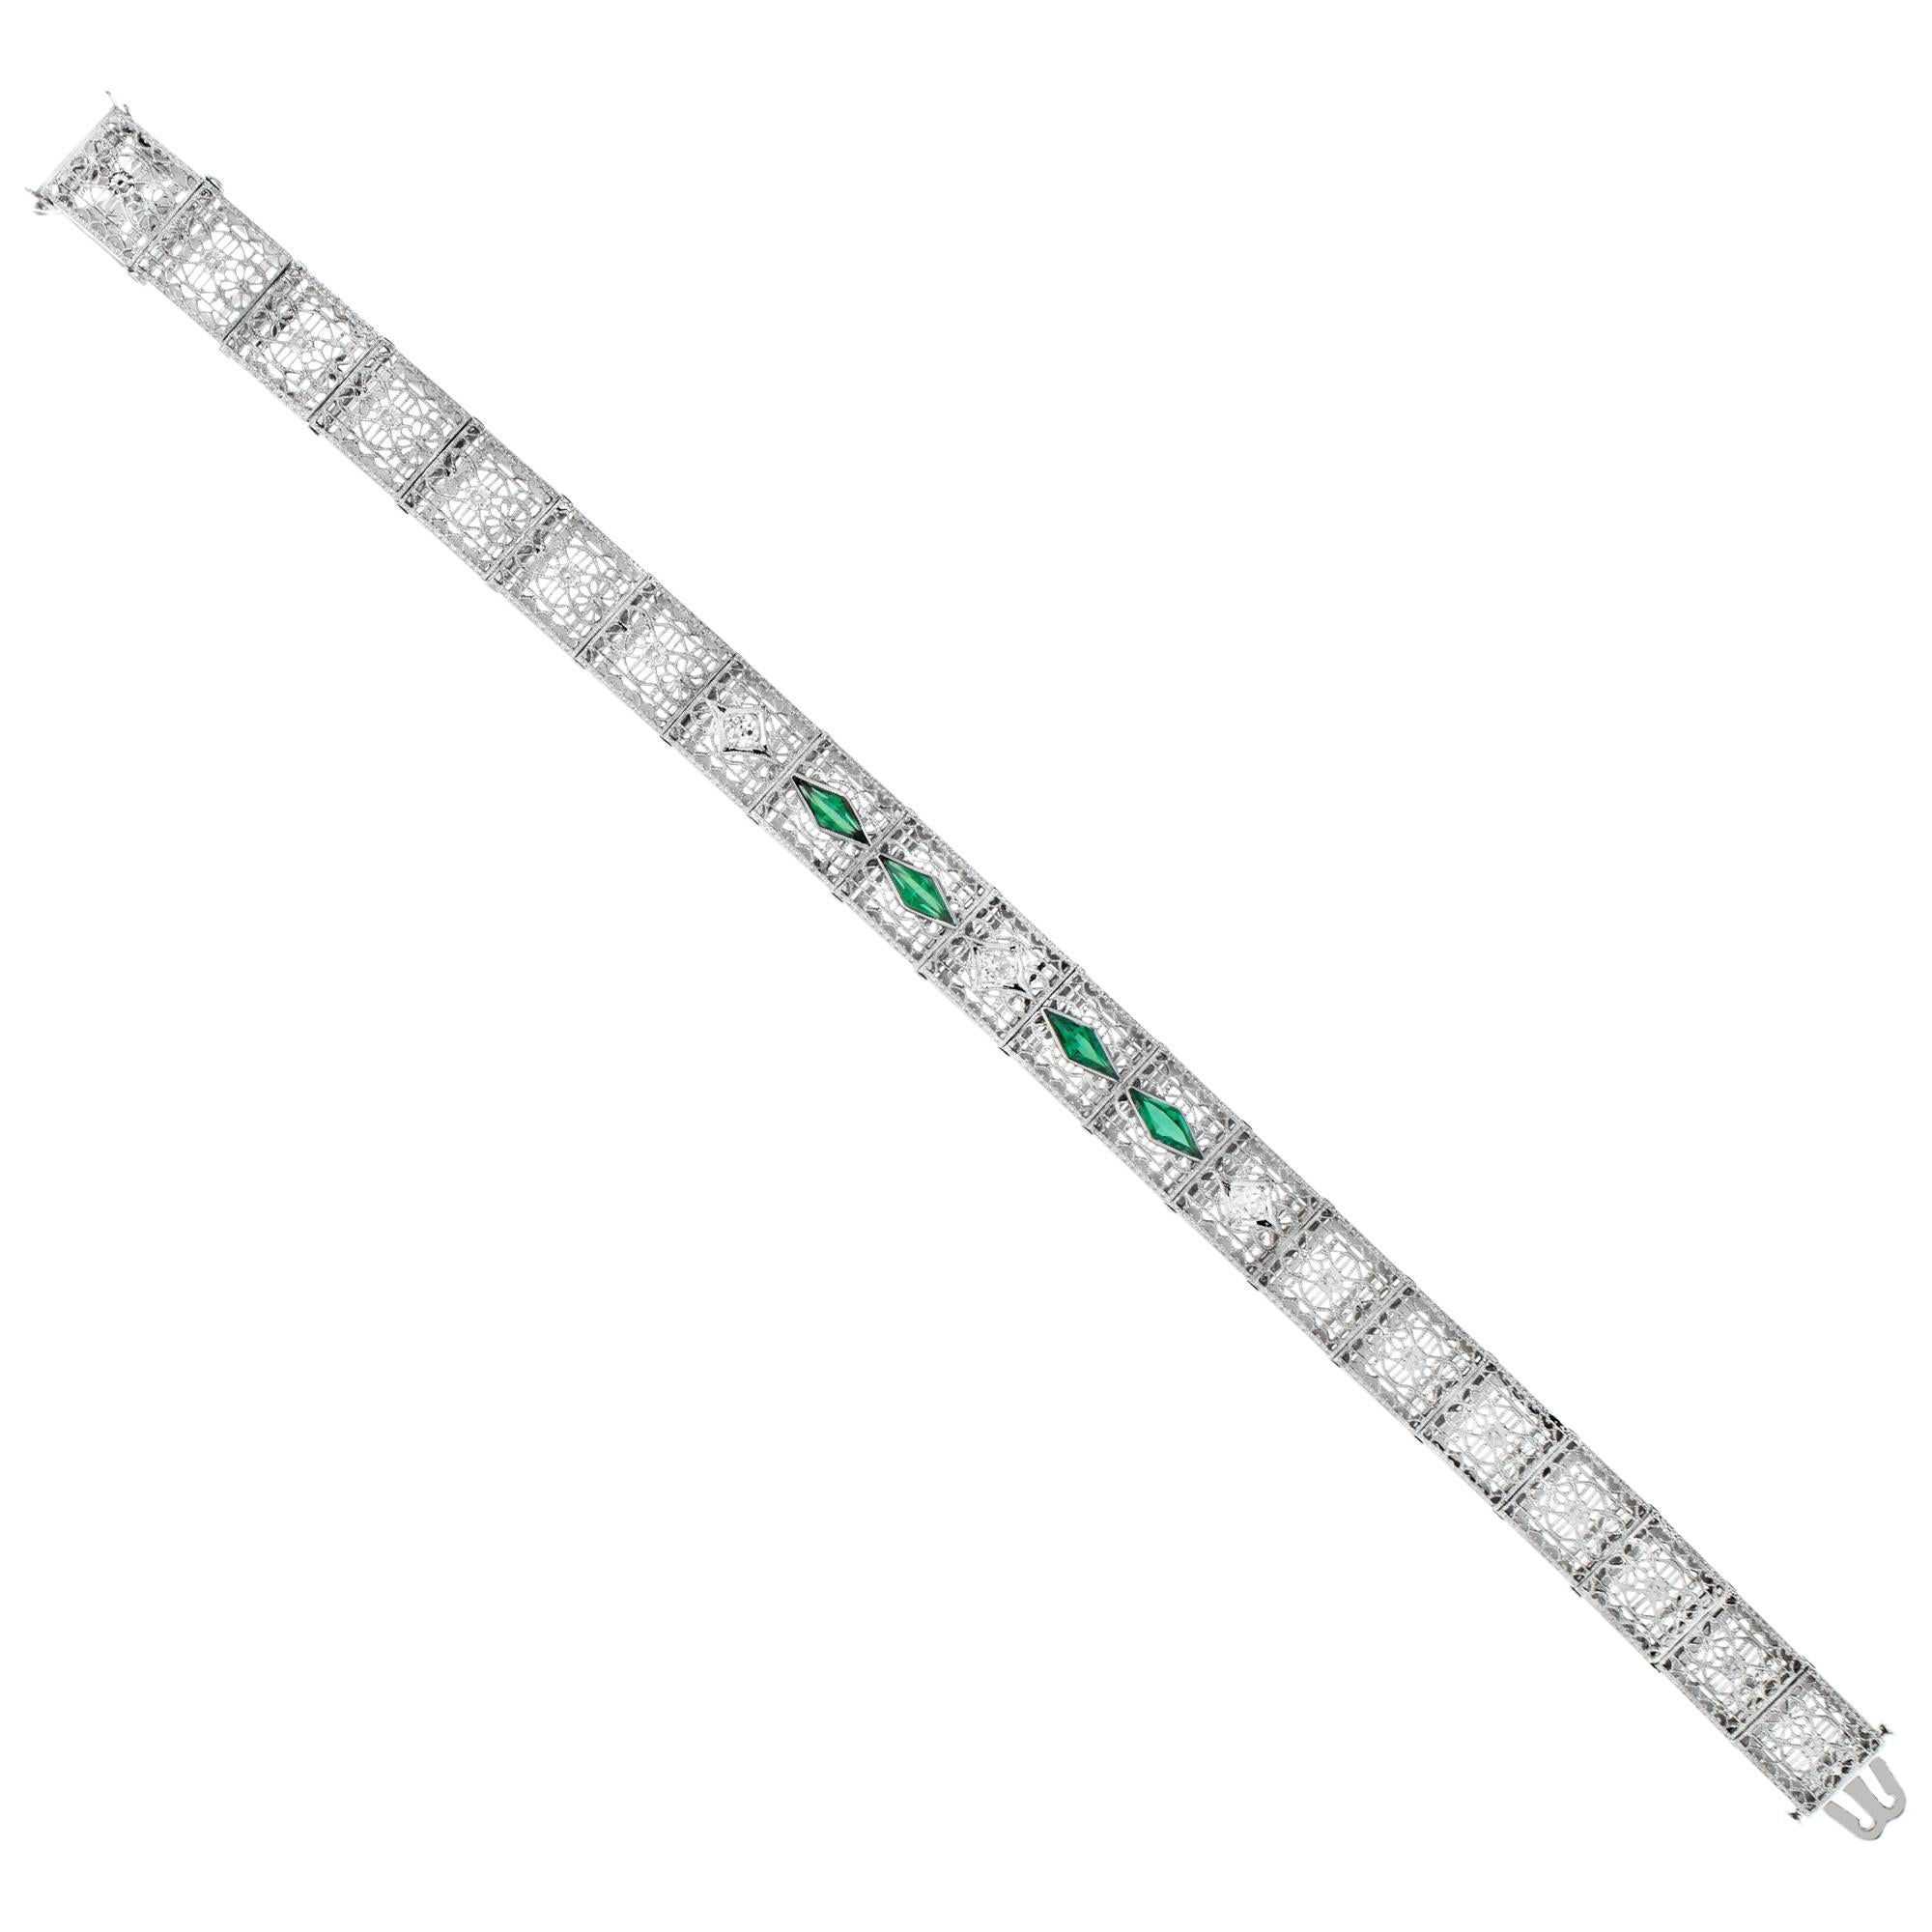 Women's Emerald and diamond bracelet in 14k white gold with platinum top